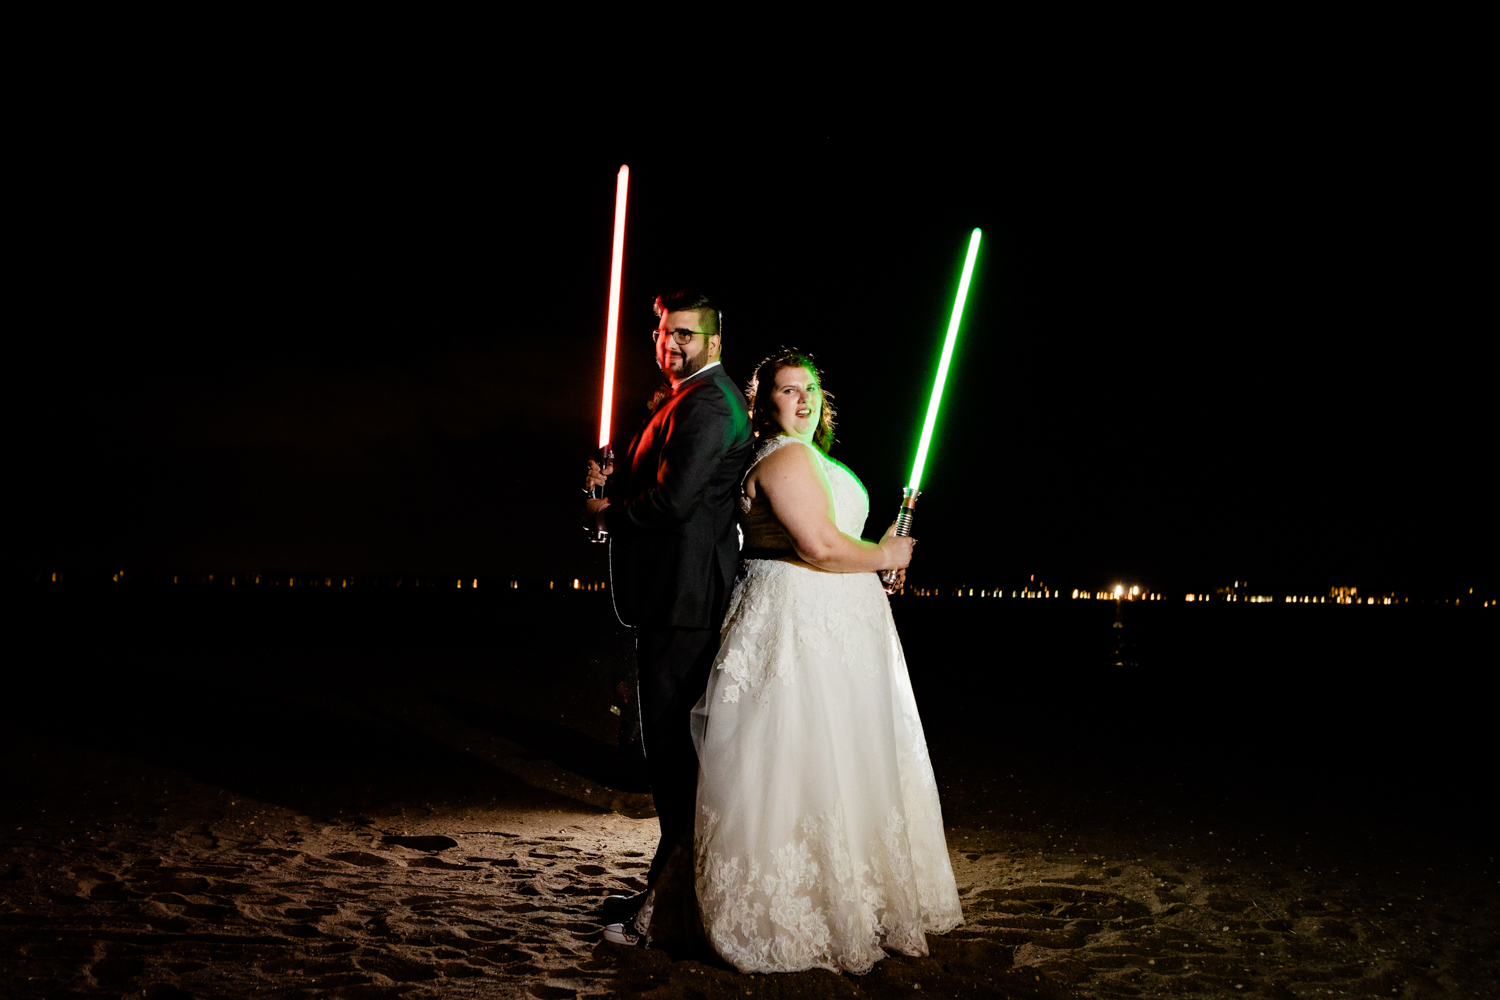 Bride and groom in the dark with lightsabers at star wars themed wedding